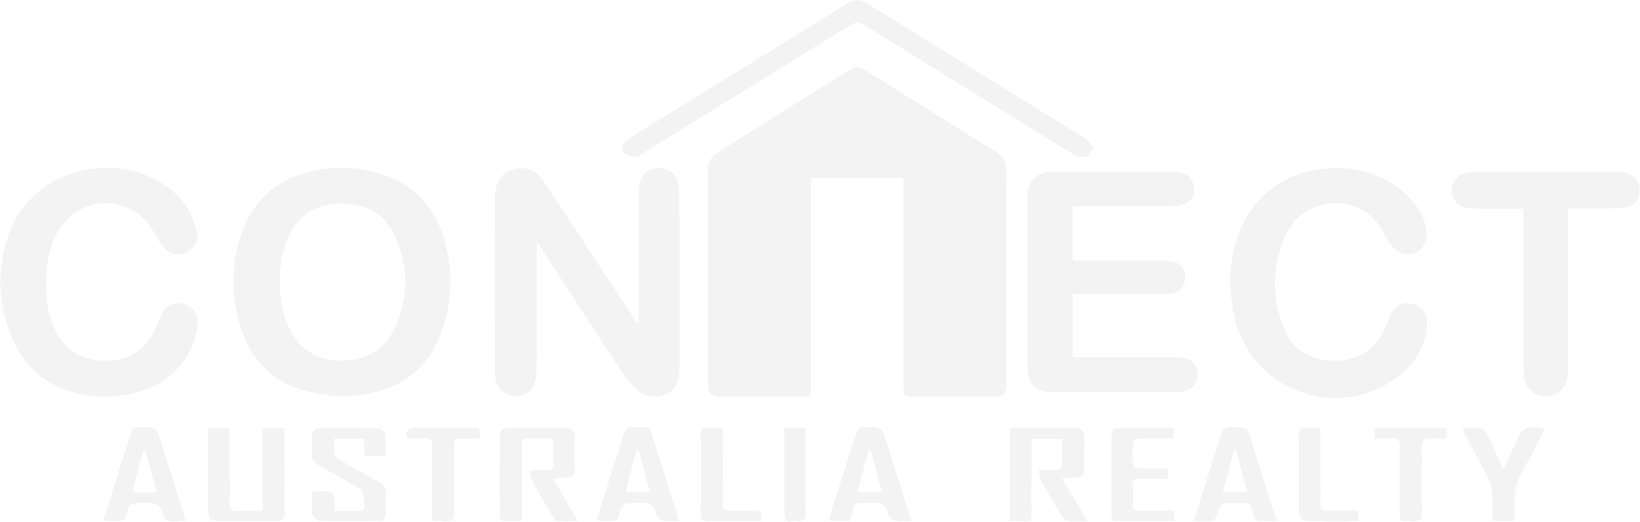 Connect Australia Realty - Real Estate Agency